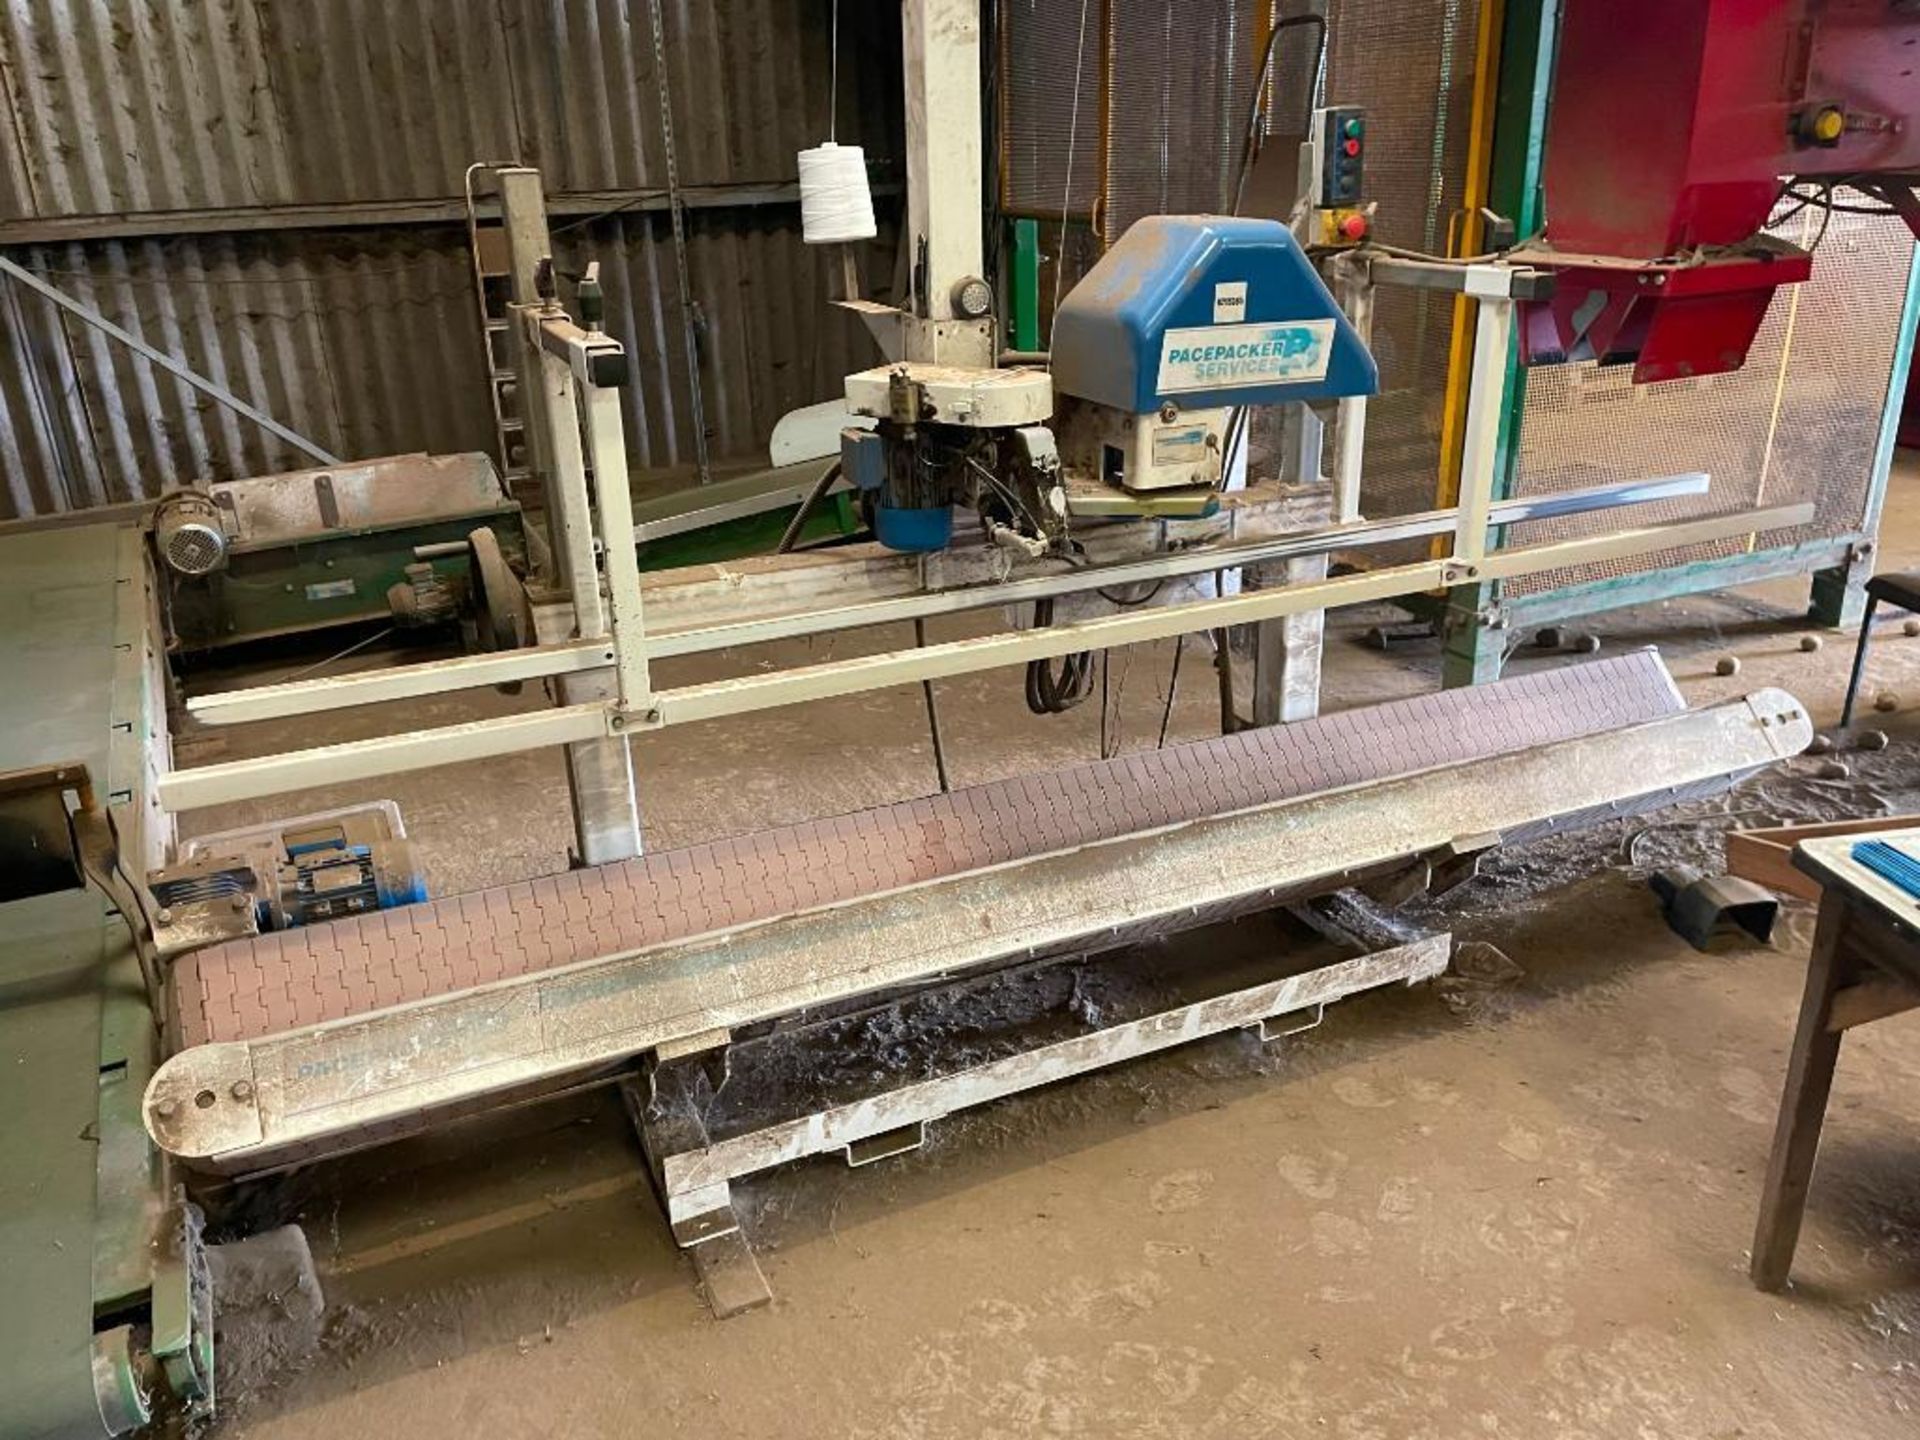 Packer Services Pace Packer bag closing system with 3m v-conveyor and Newlong stitching unit, 3ph